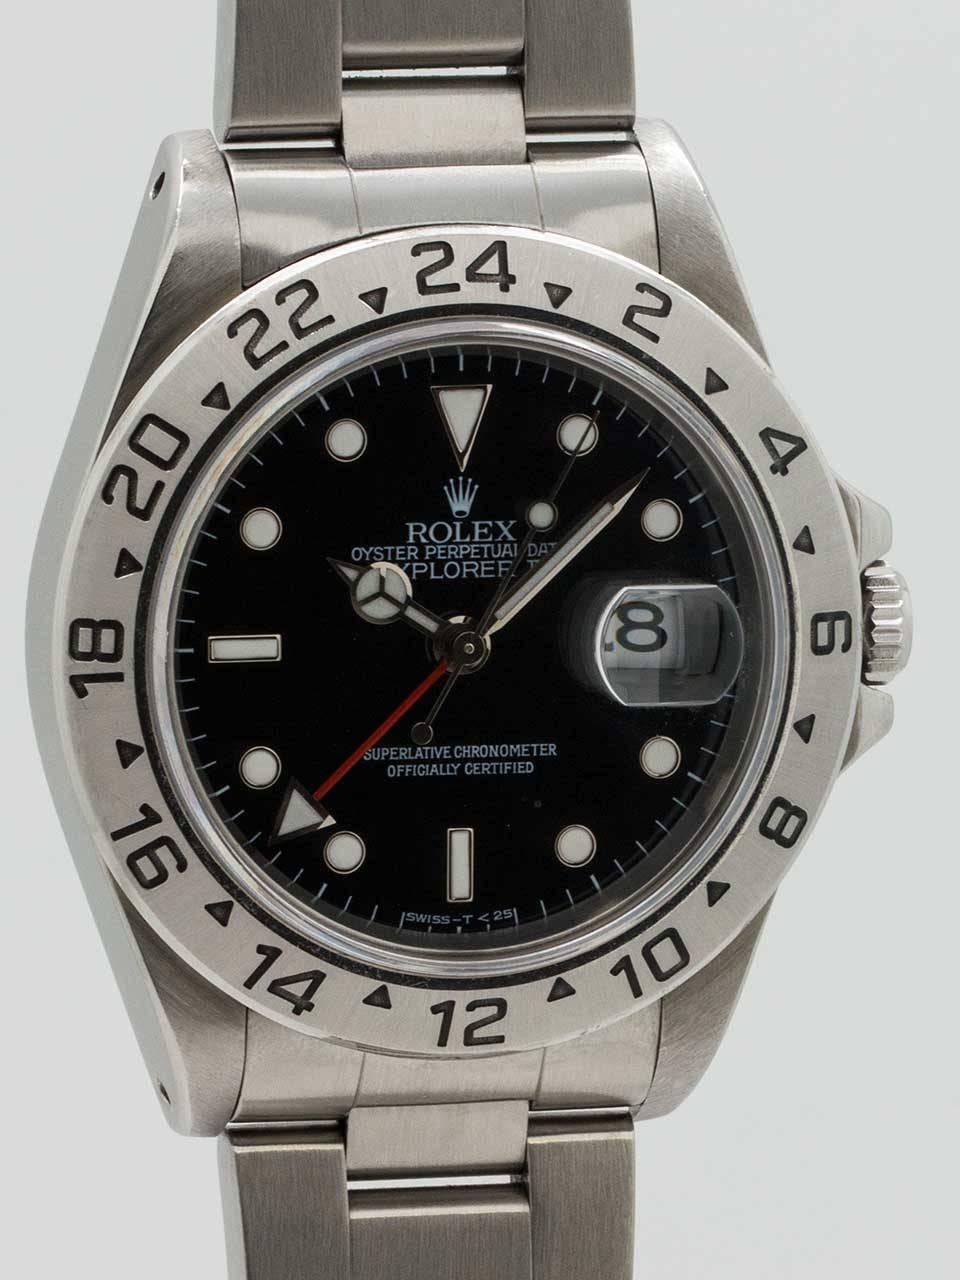 Rolex Stainless Steel Explorer II ref 16570 serial number T8 circa 1996, complete with inner and outer box, papers, and booklets. Popular black dial model with 40mm diameter case , fixed 24  hour bezel and sapphire crystal. Note that this